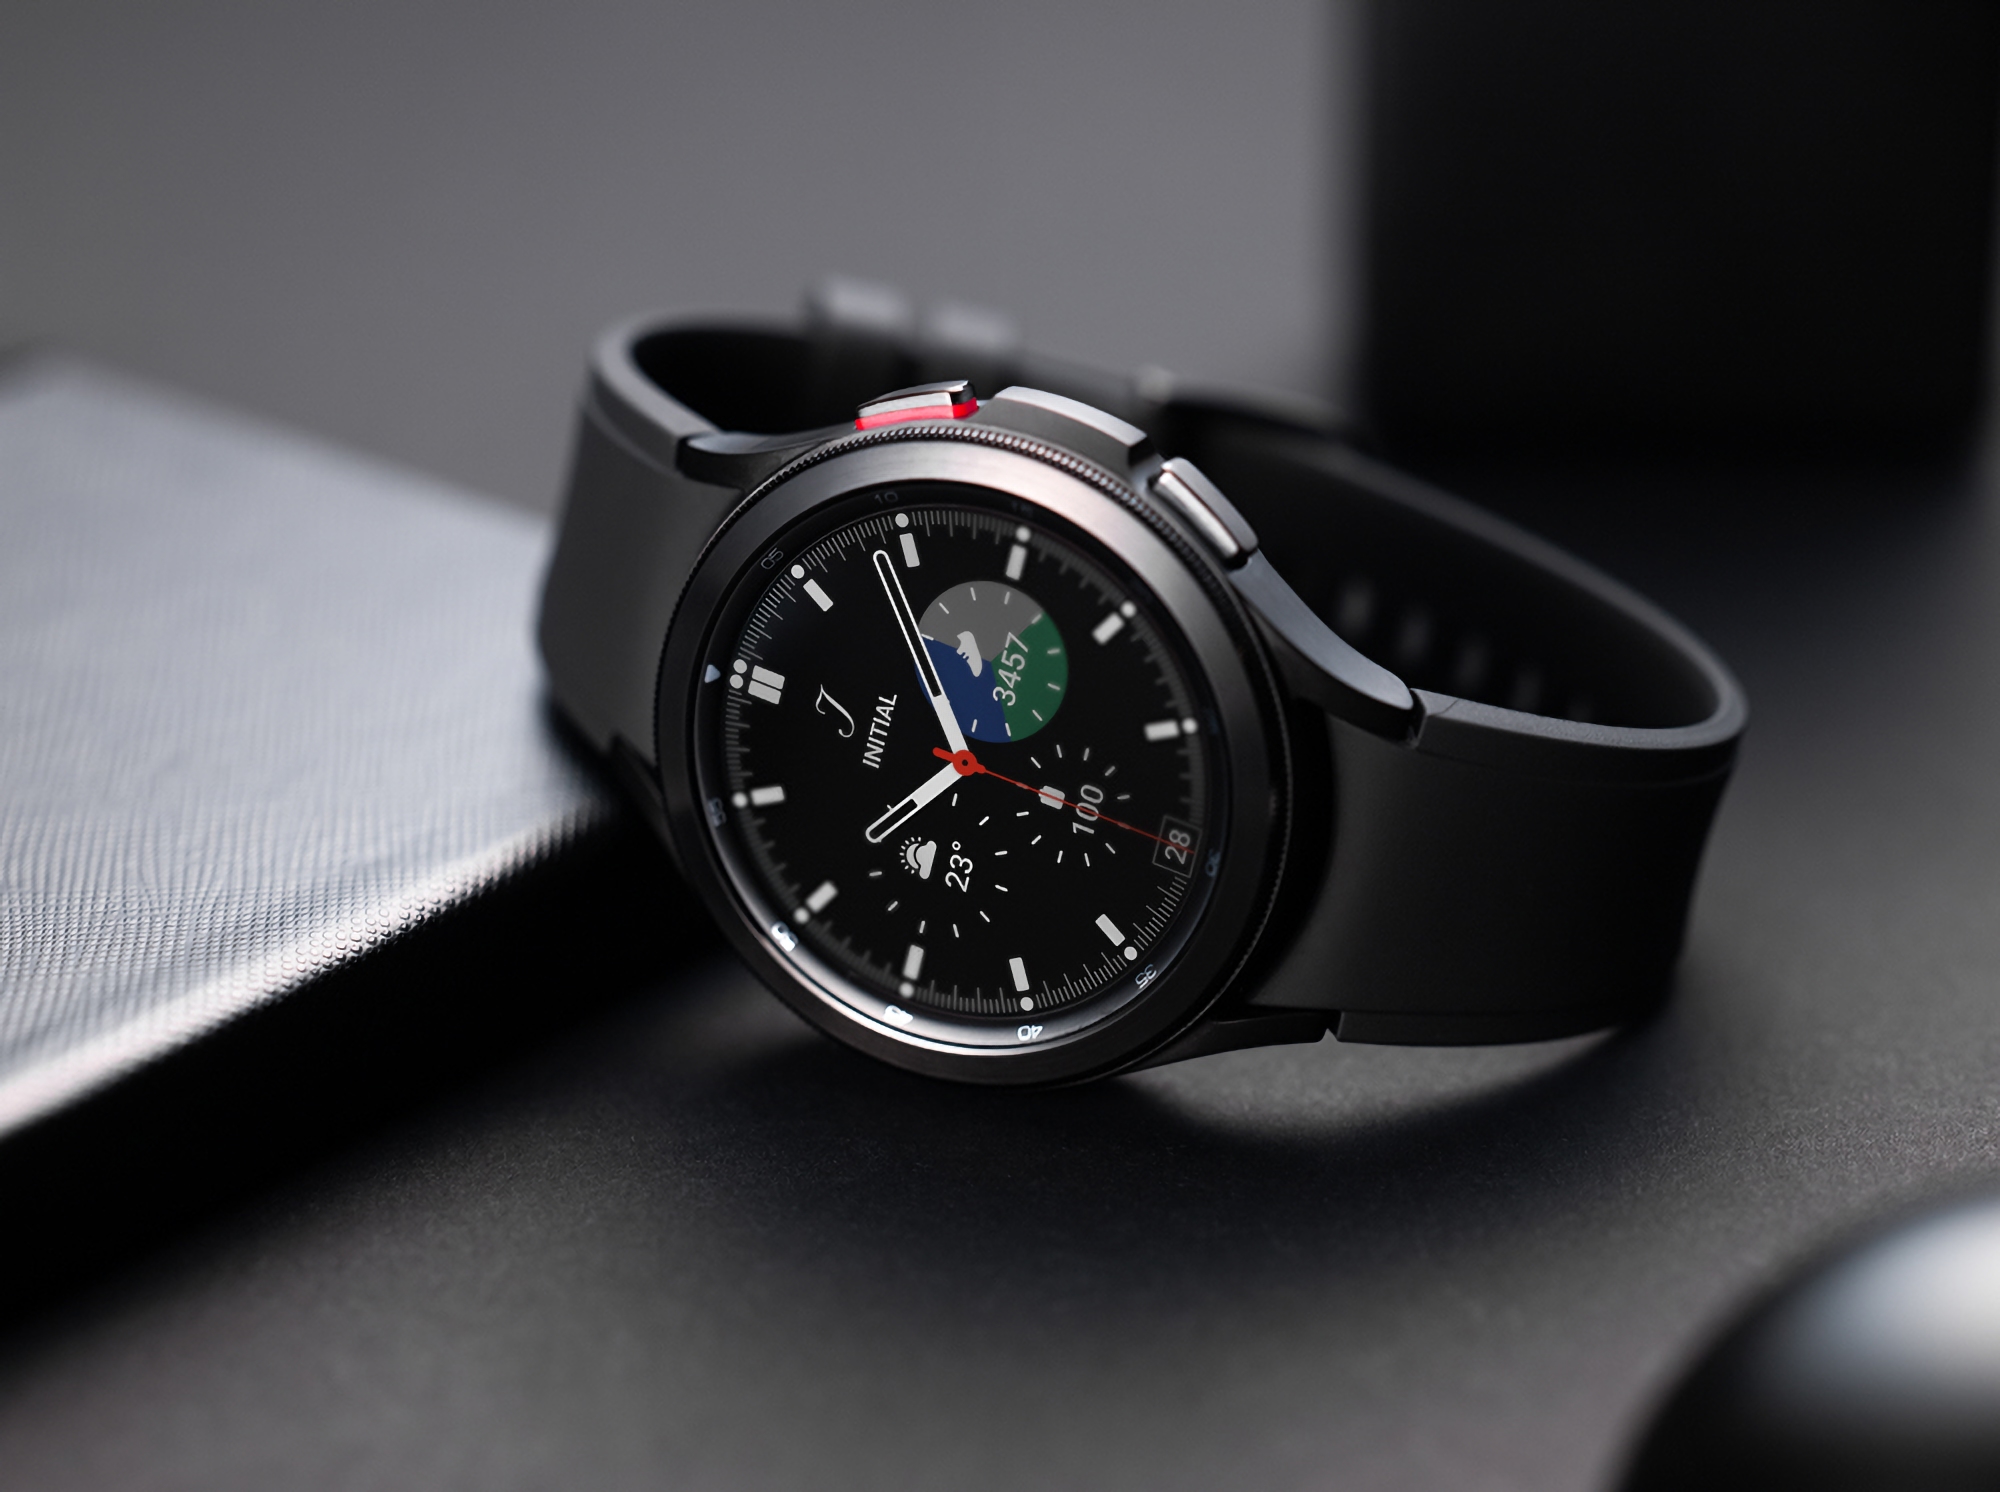 Samsung Galaxy Watch 5 Pro smart / voice assistant/ health features/ crash detection/ rotating bezel